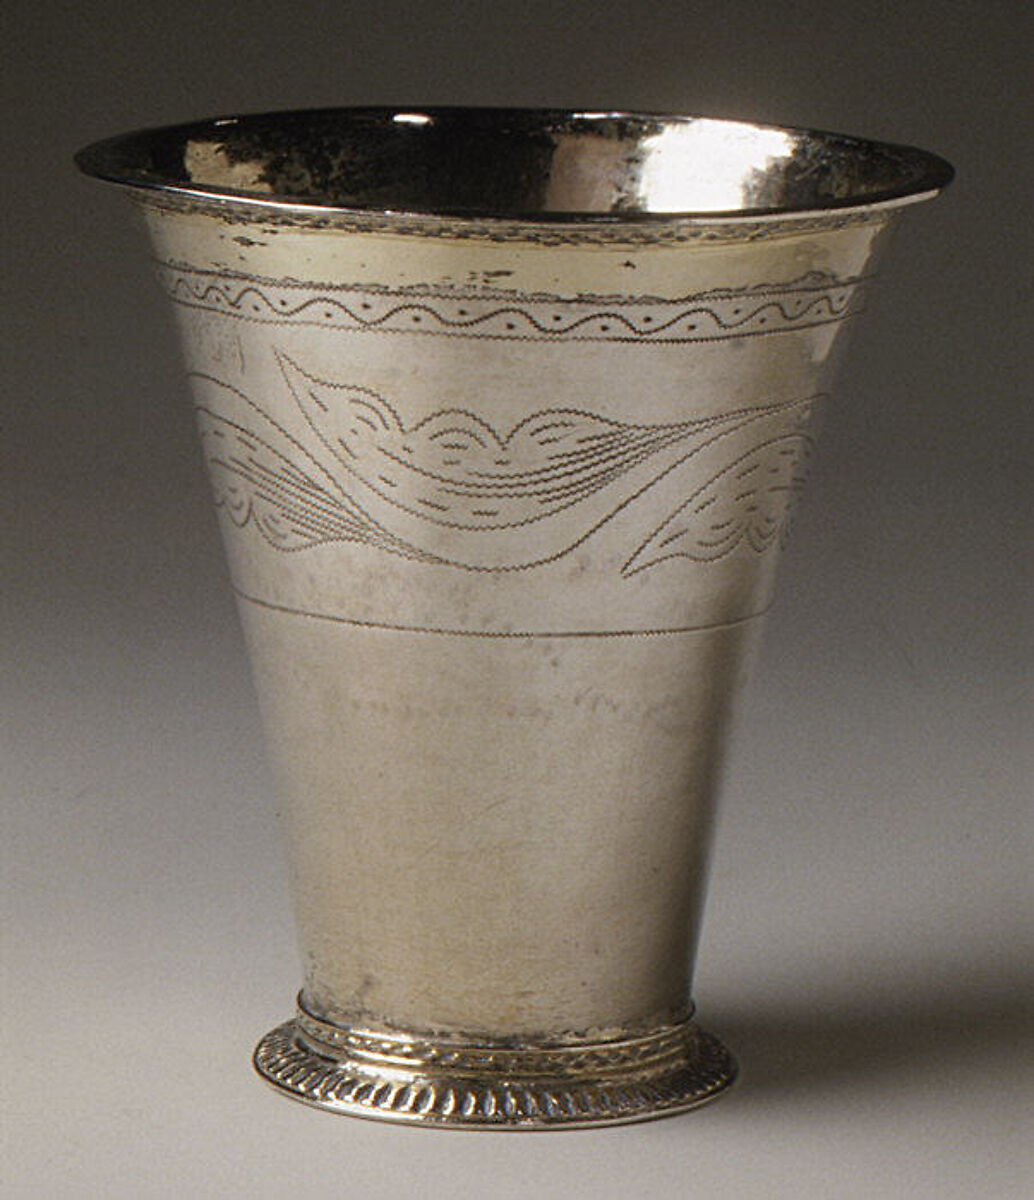 Cup or beaker, Silver, gilt lined, Swedish 